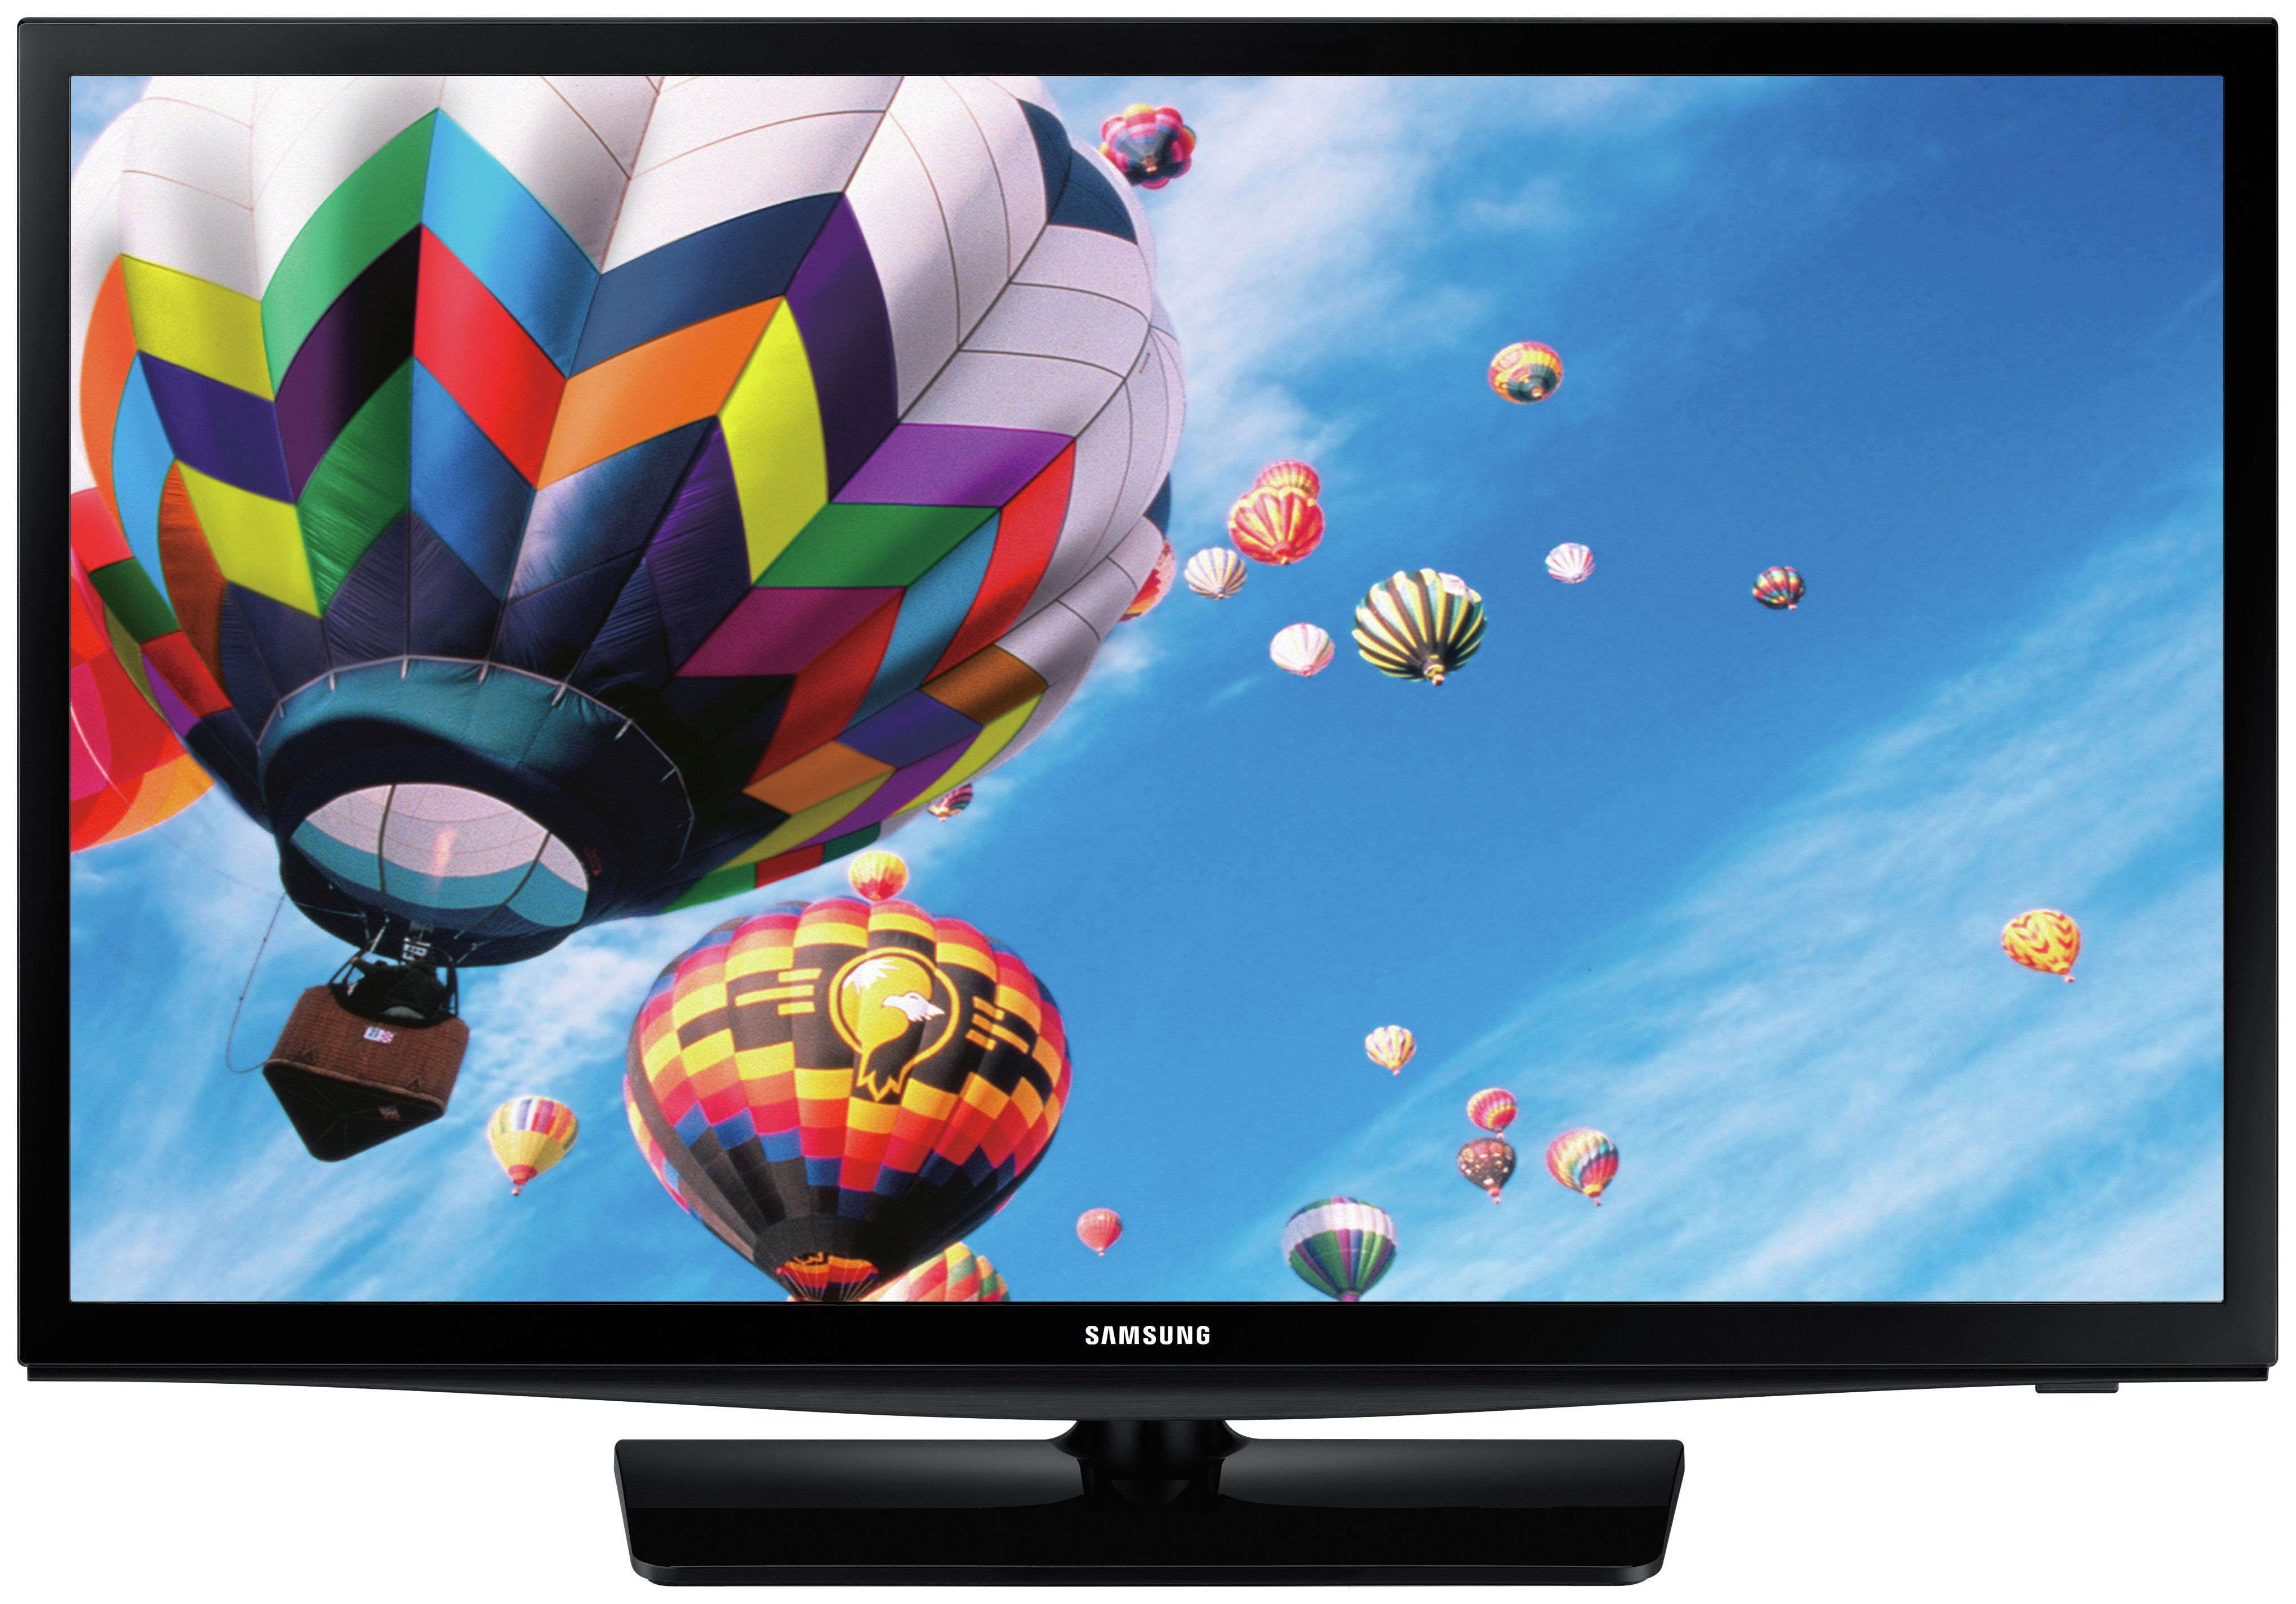 Samsung 24 Inch Ue24h4003awxxu Hd Ready Tv Review Review 2679